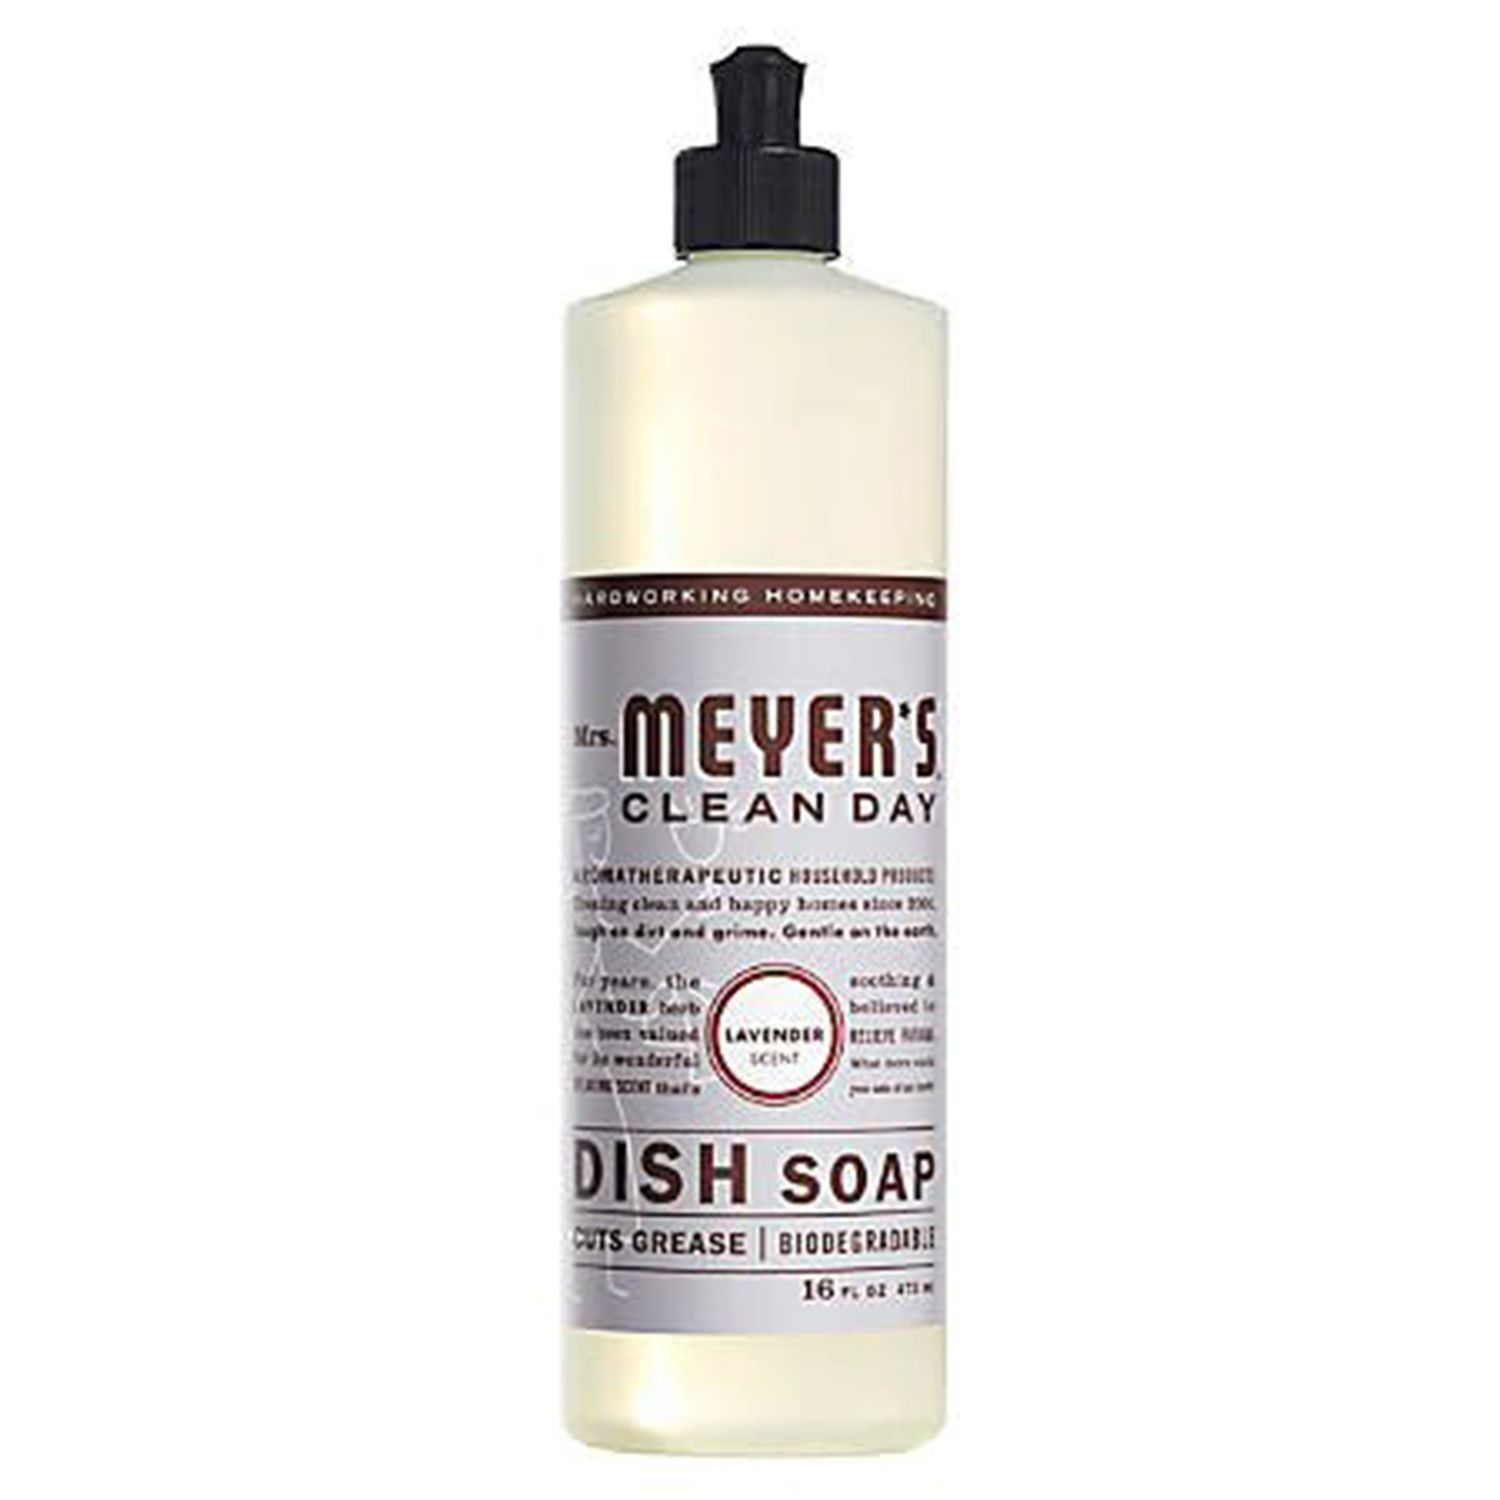 Mrs. Meyers Clean Day Dish Soap Lavender